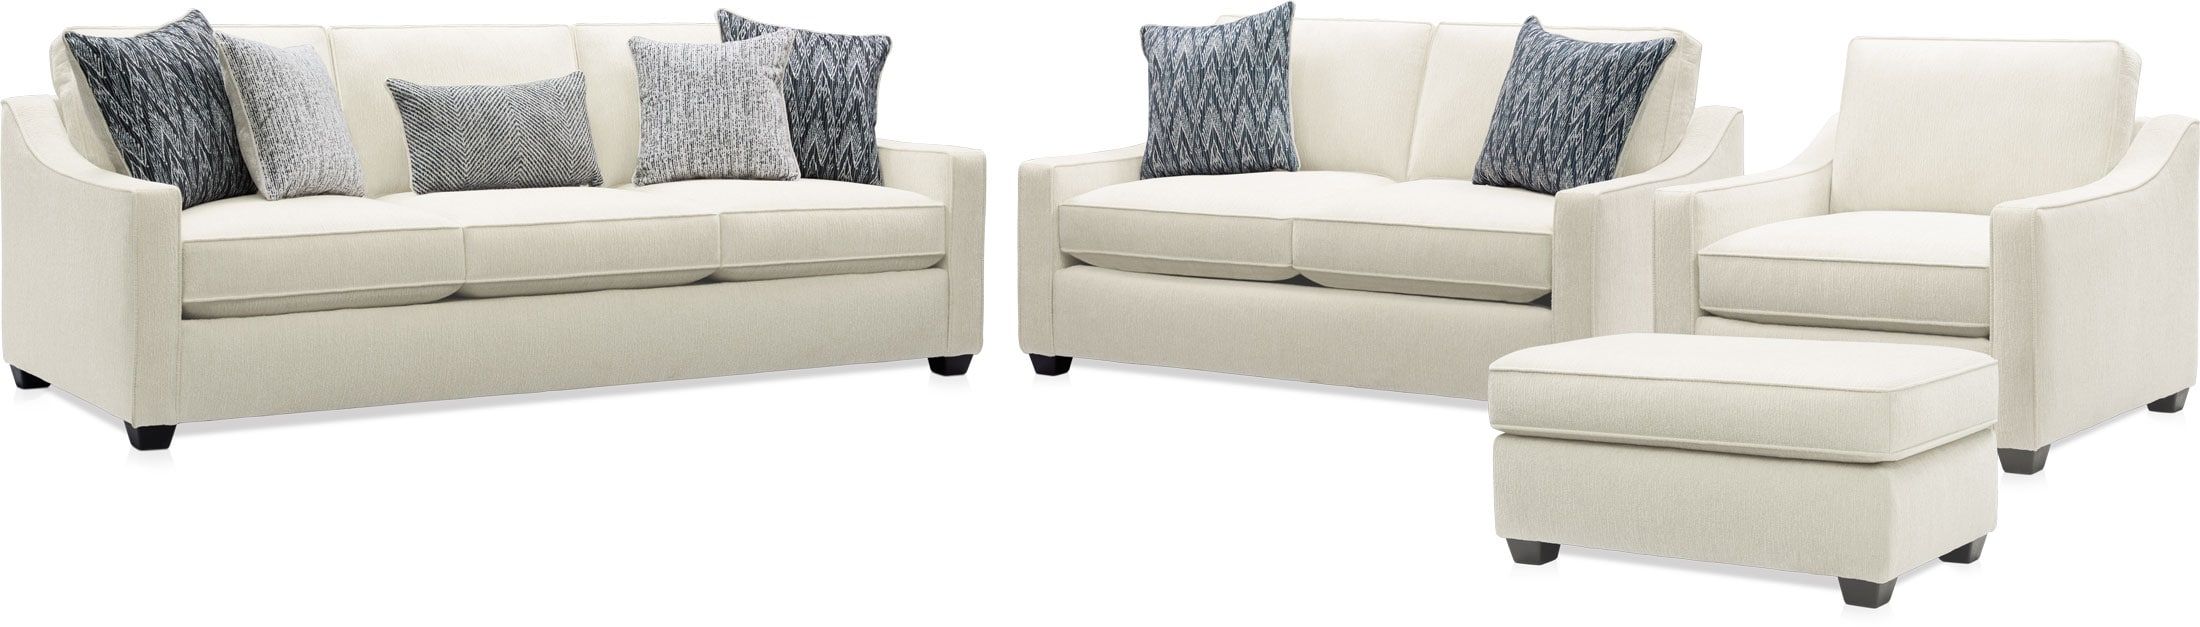 Trendy And Eye-Catchy Callie Sofa Chairs